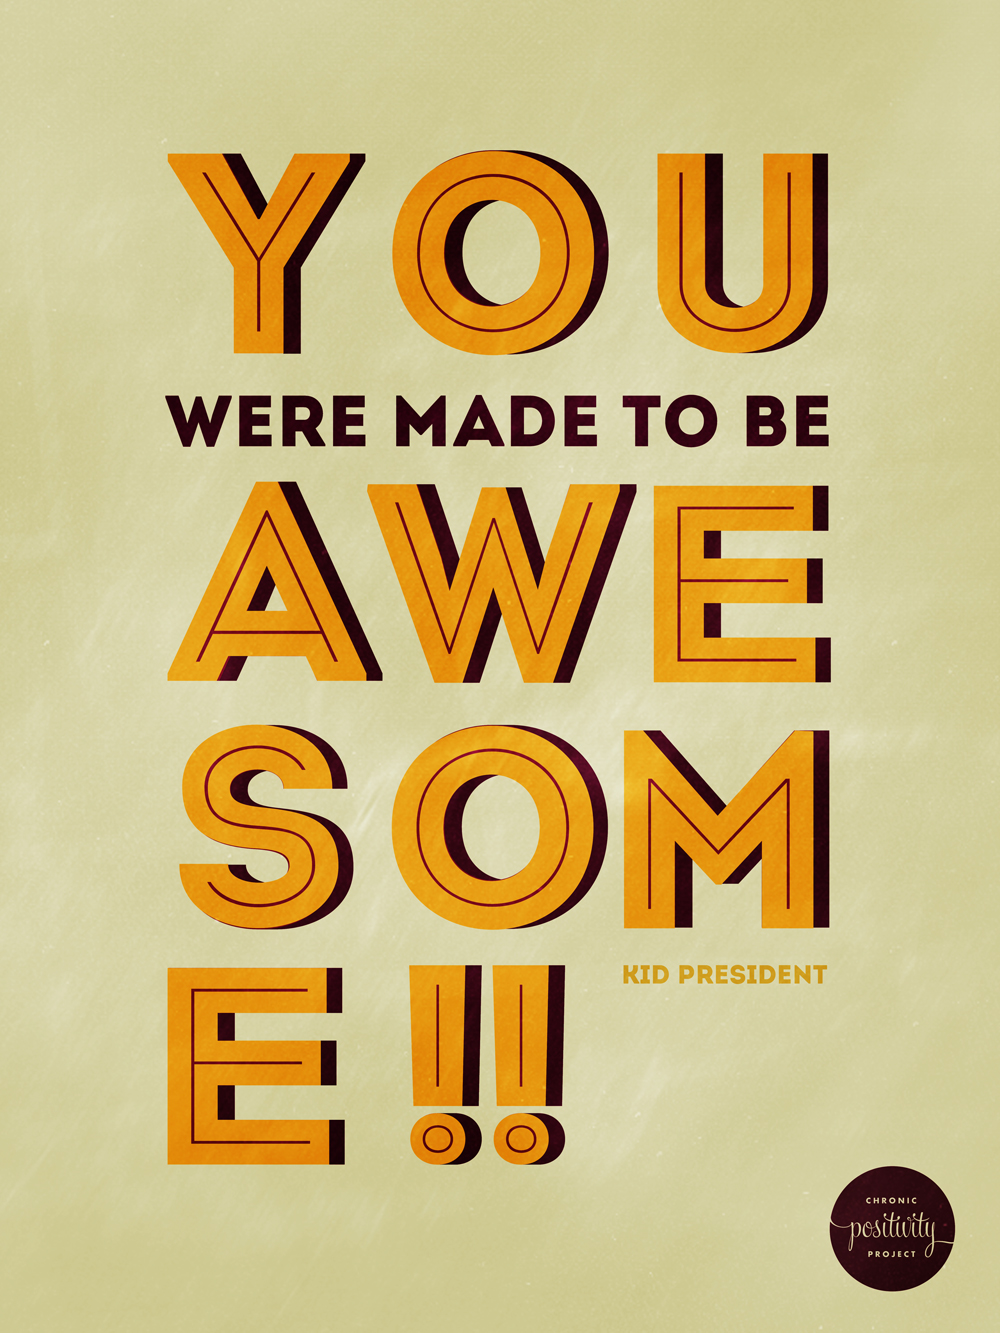 28: You were made to be awesome - Kid President